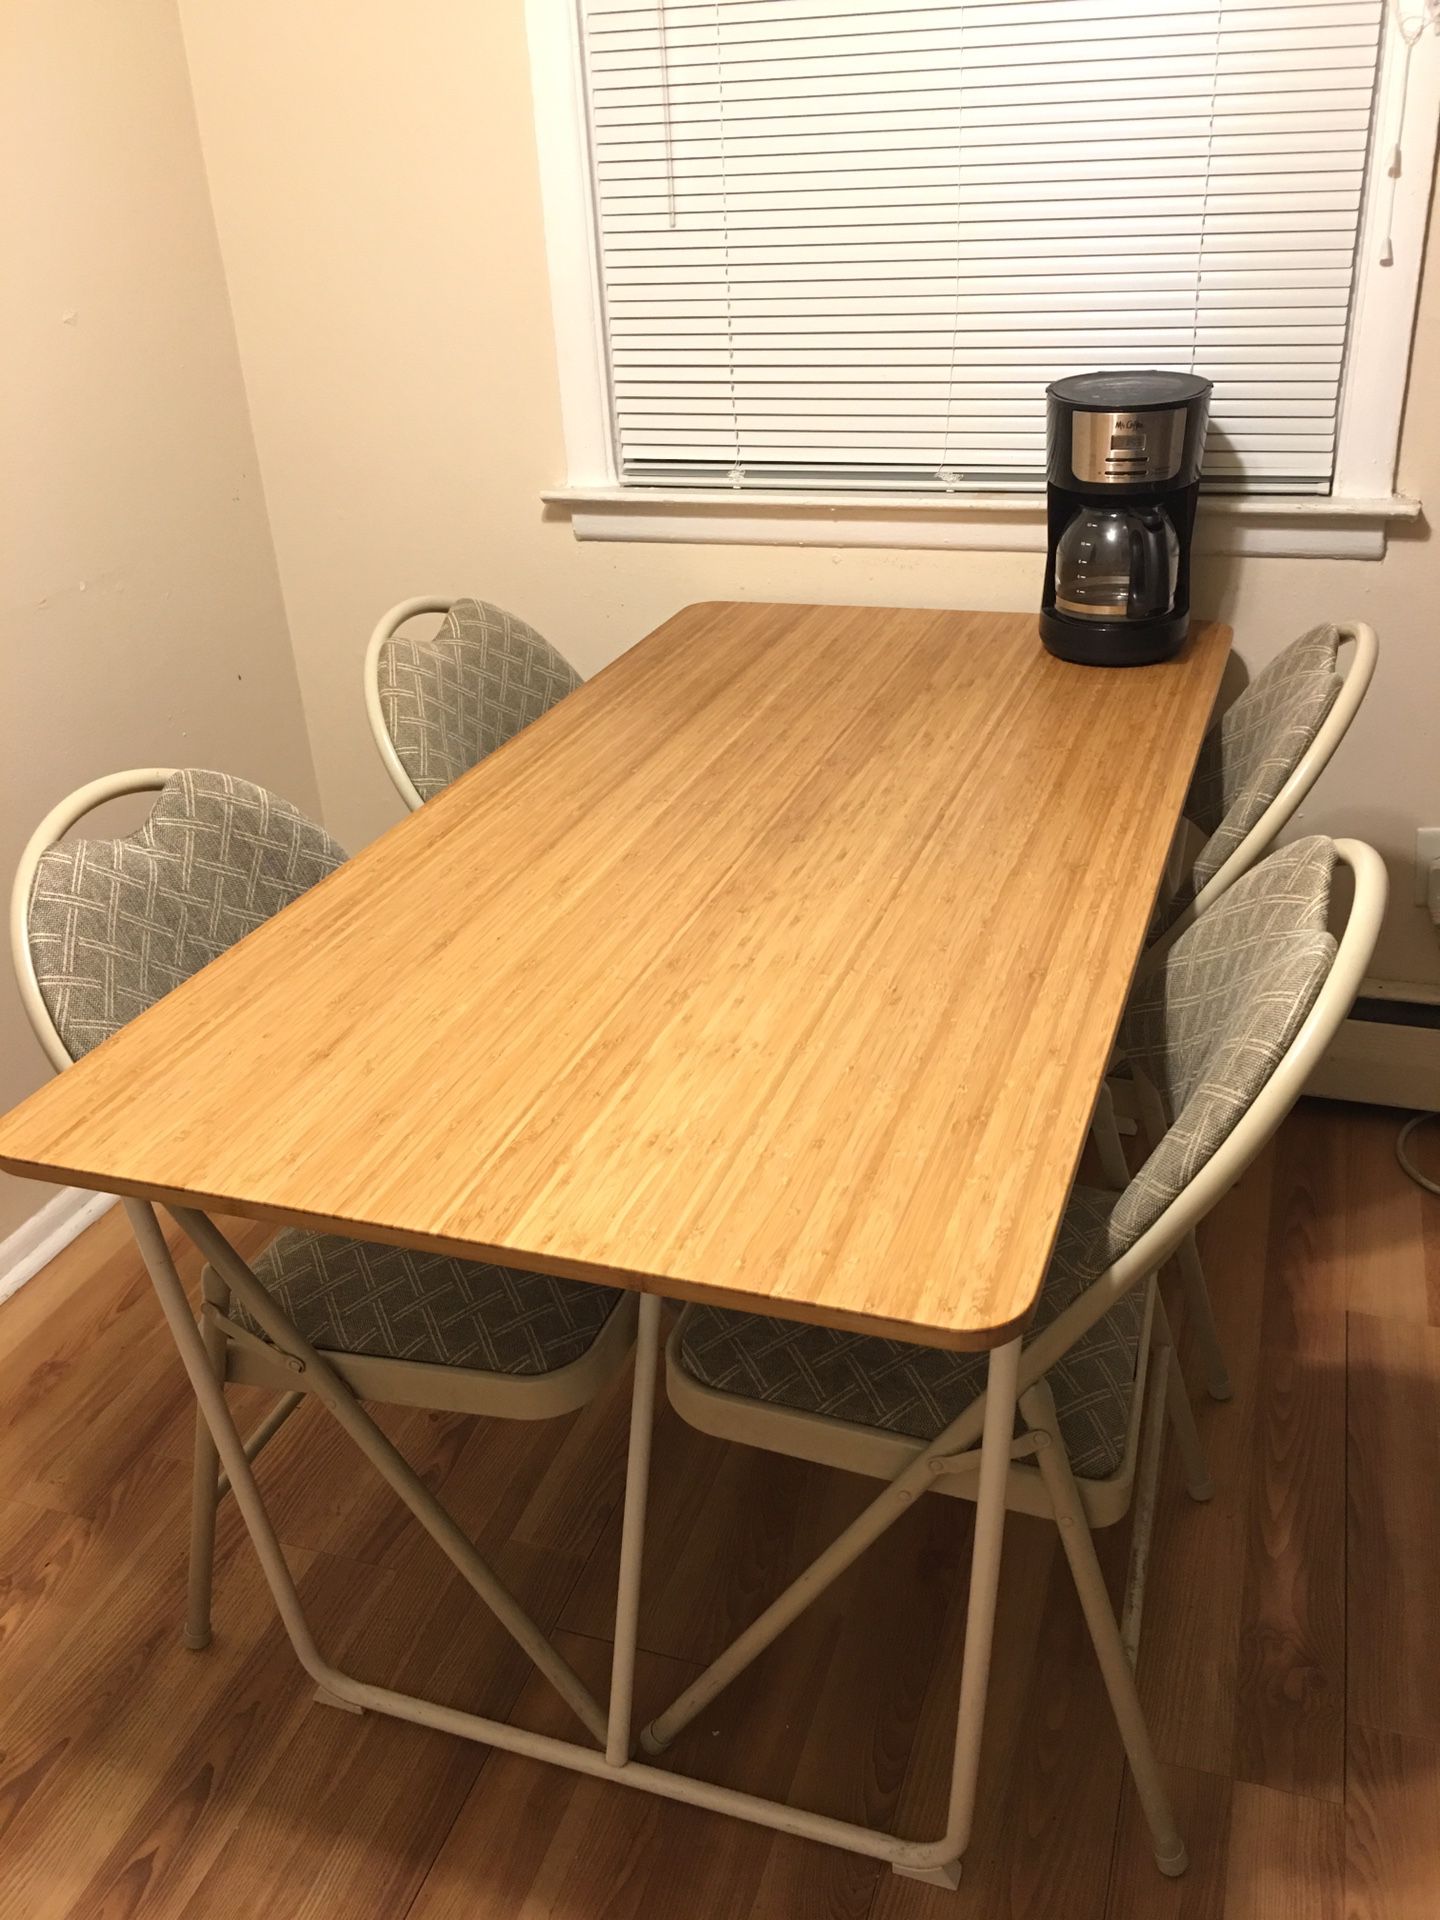 IKEA dining table ,bamboo table top 59x30 3/4 "